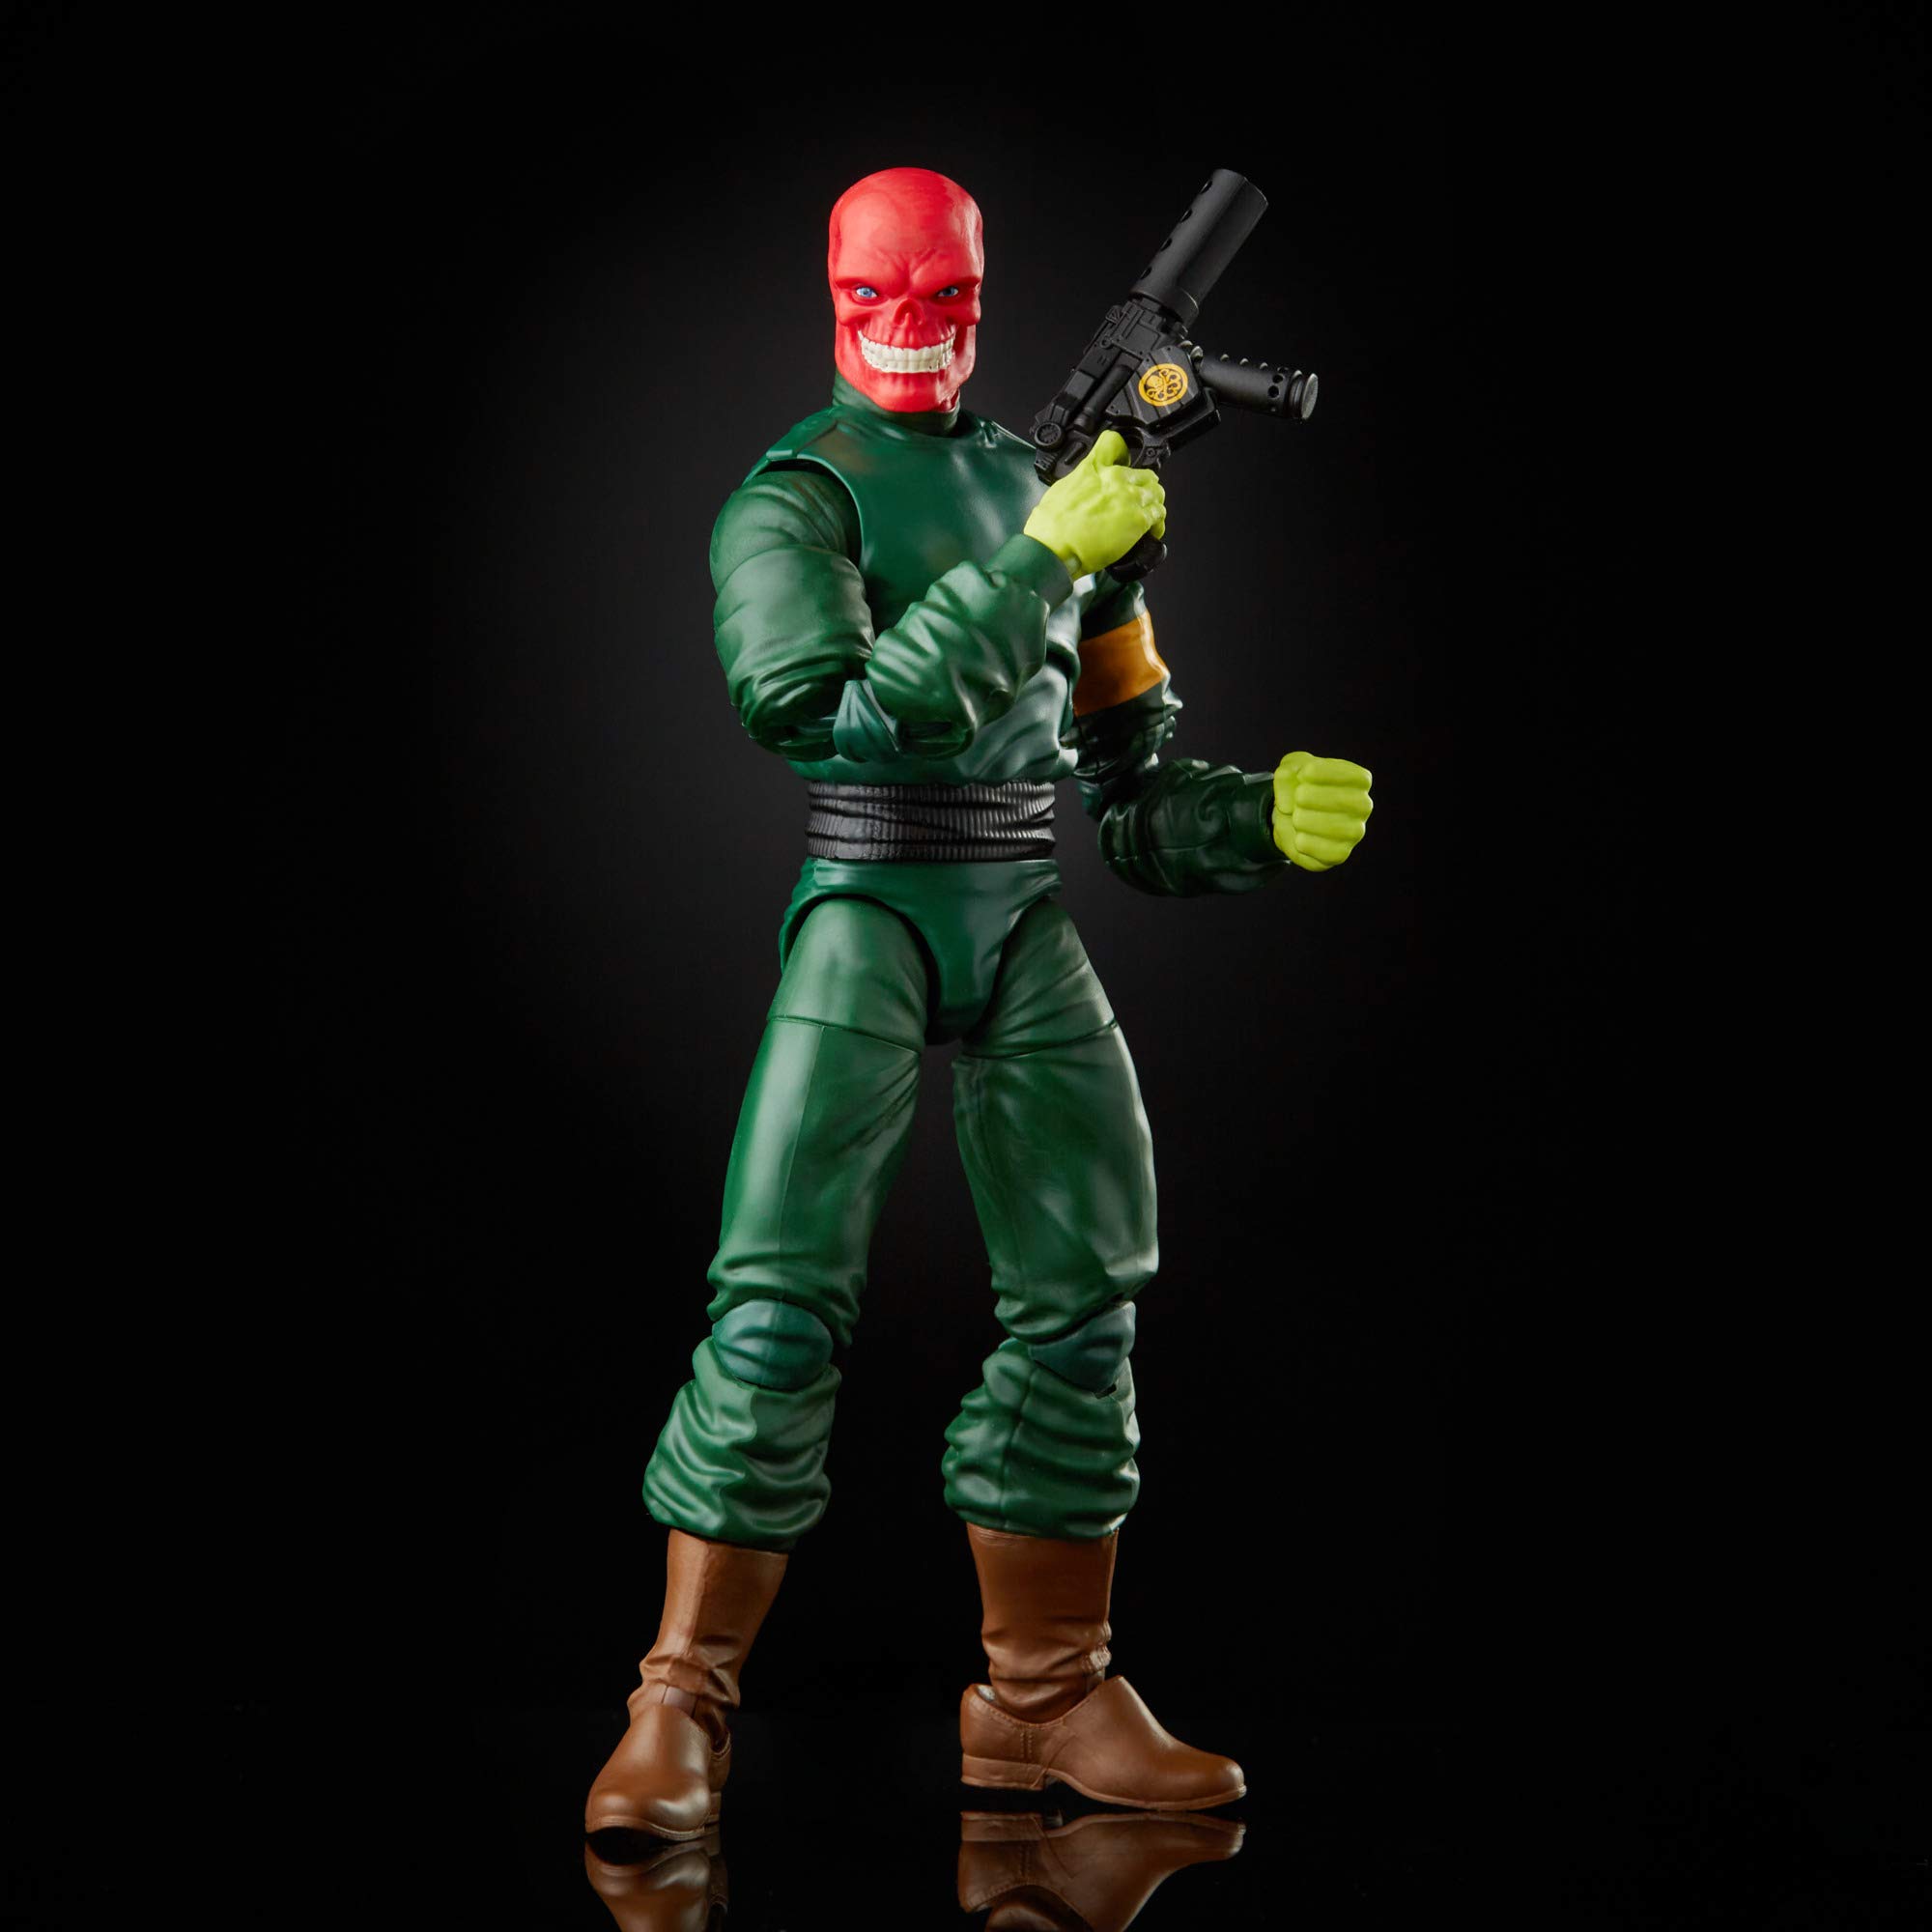 Marvel Hasbro Hasbro Legends Series 6-inch Collectible Action Red Skull Figure and 7 Accessories and 1 Build-a-Figure Part, Premium Design